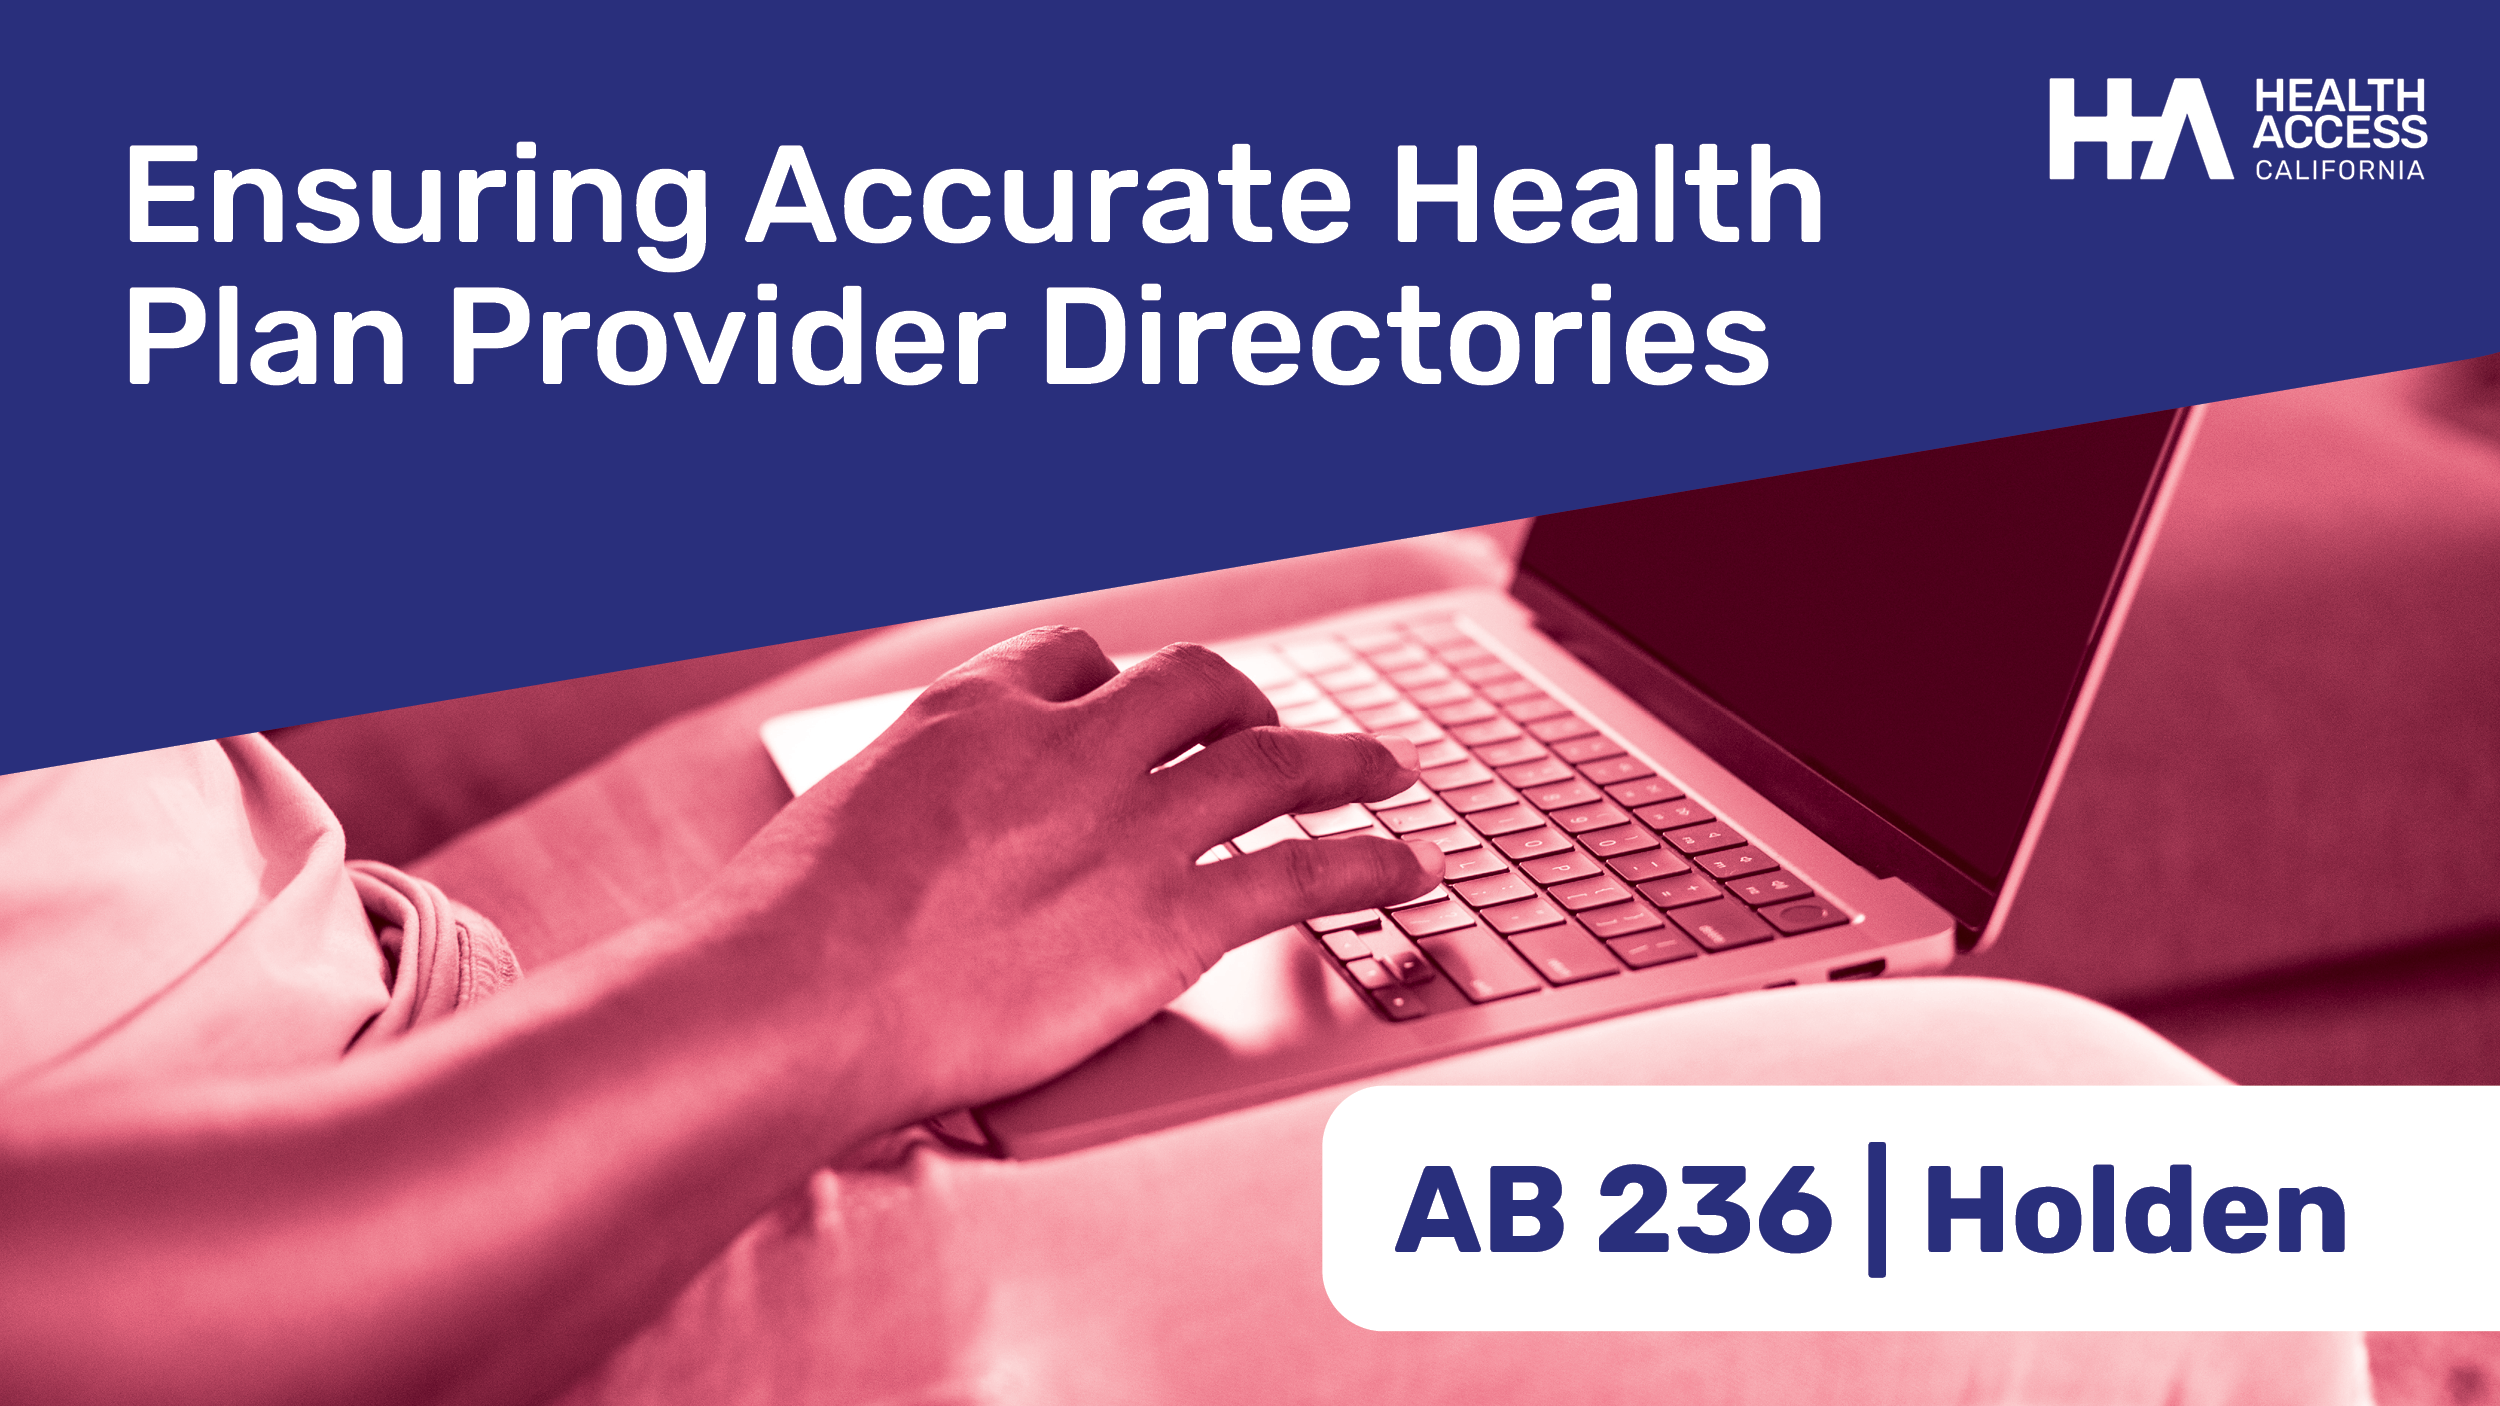 AB 236 (Holden) Ensuring Accurate Health Plan Provider Directories